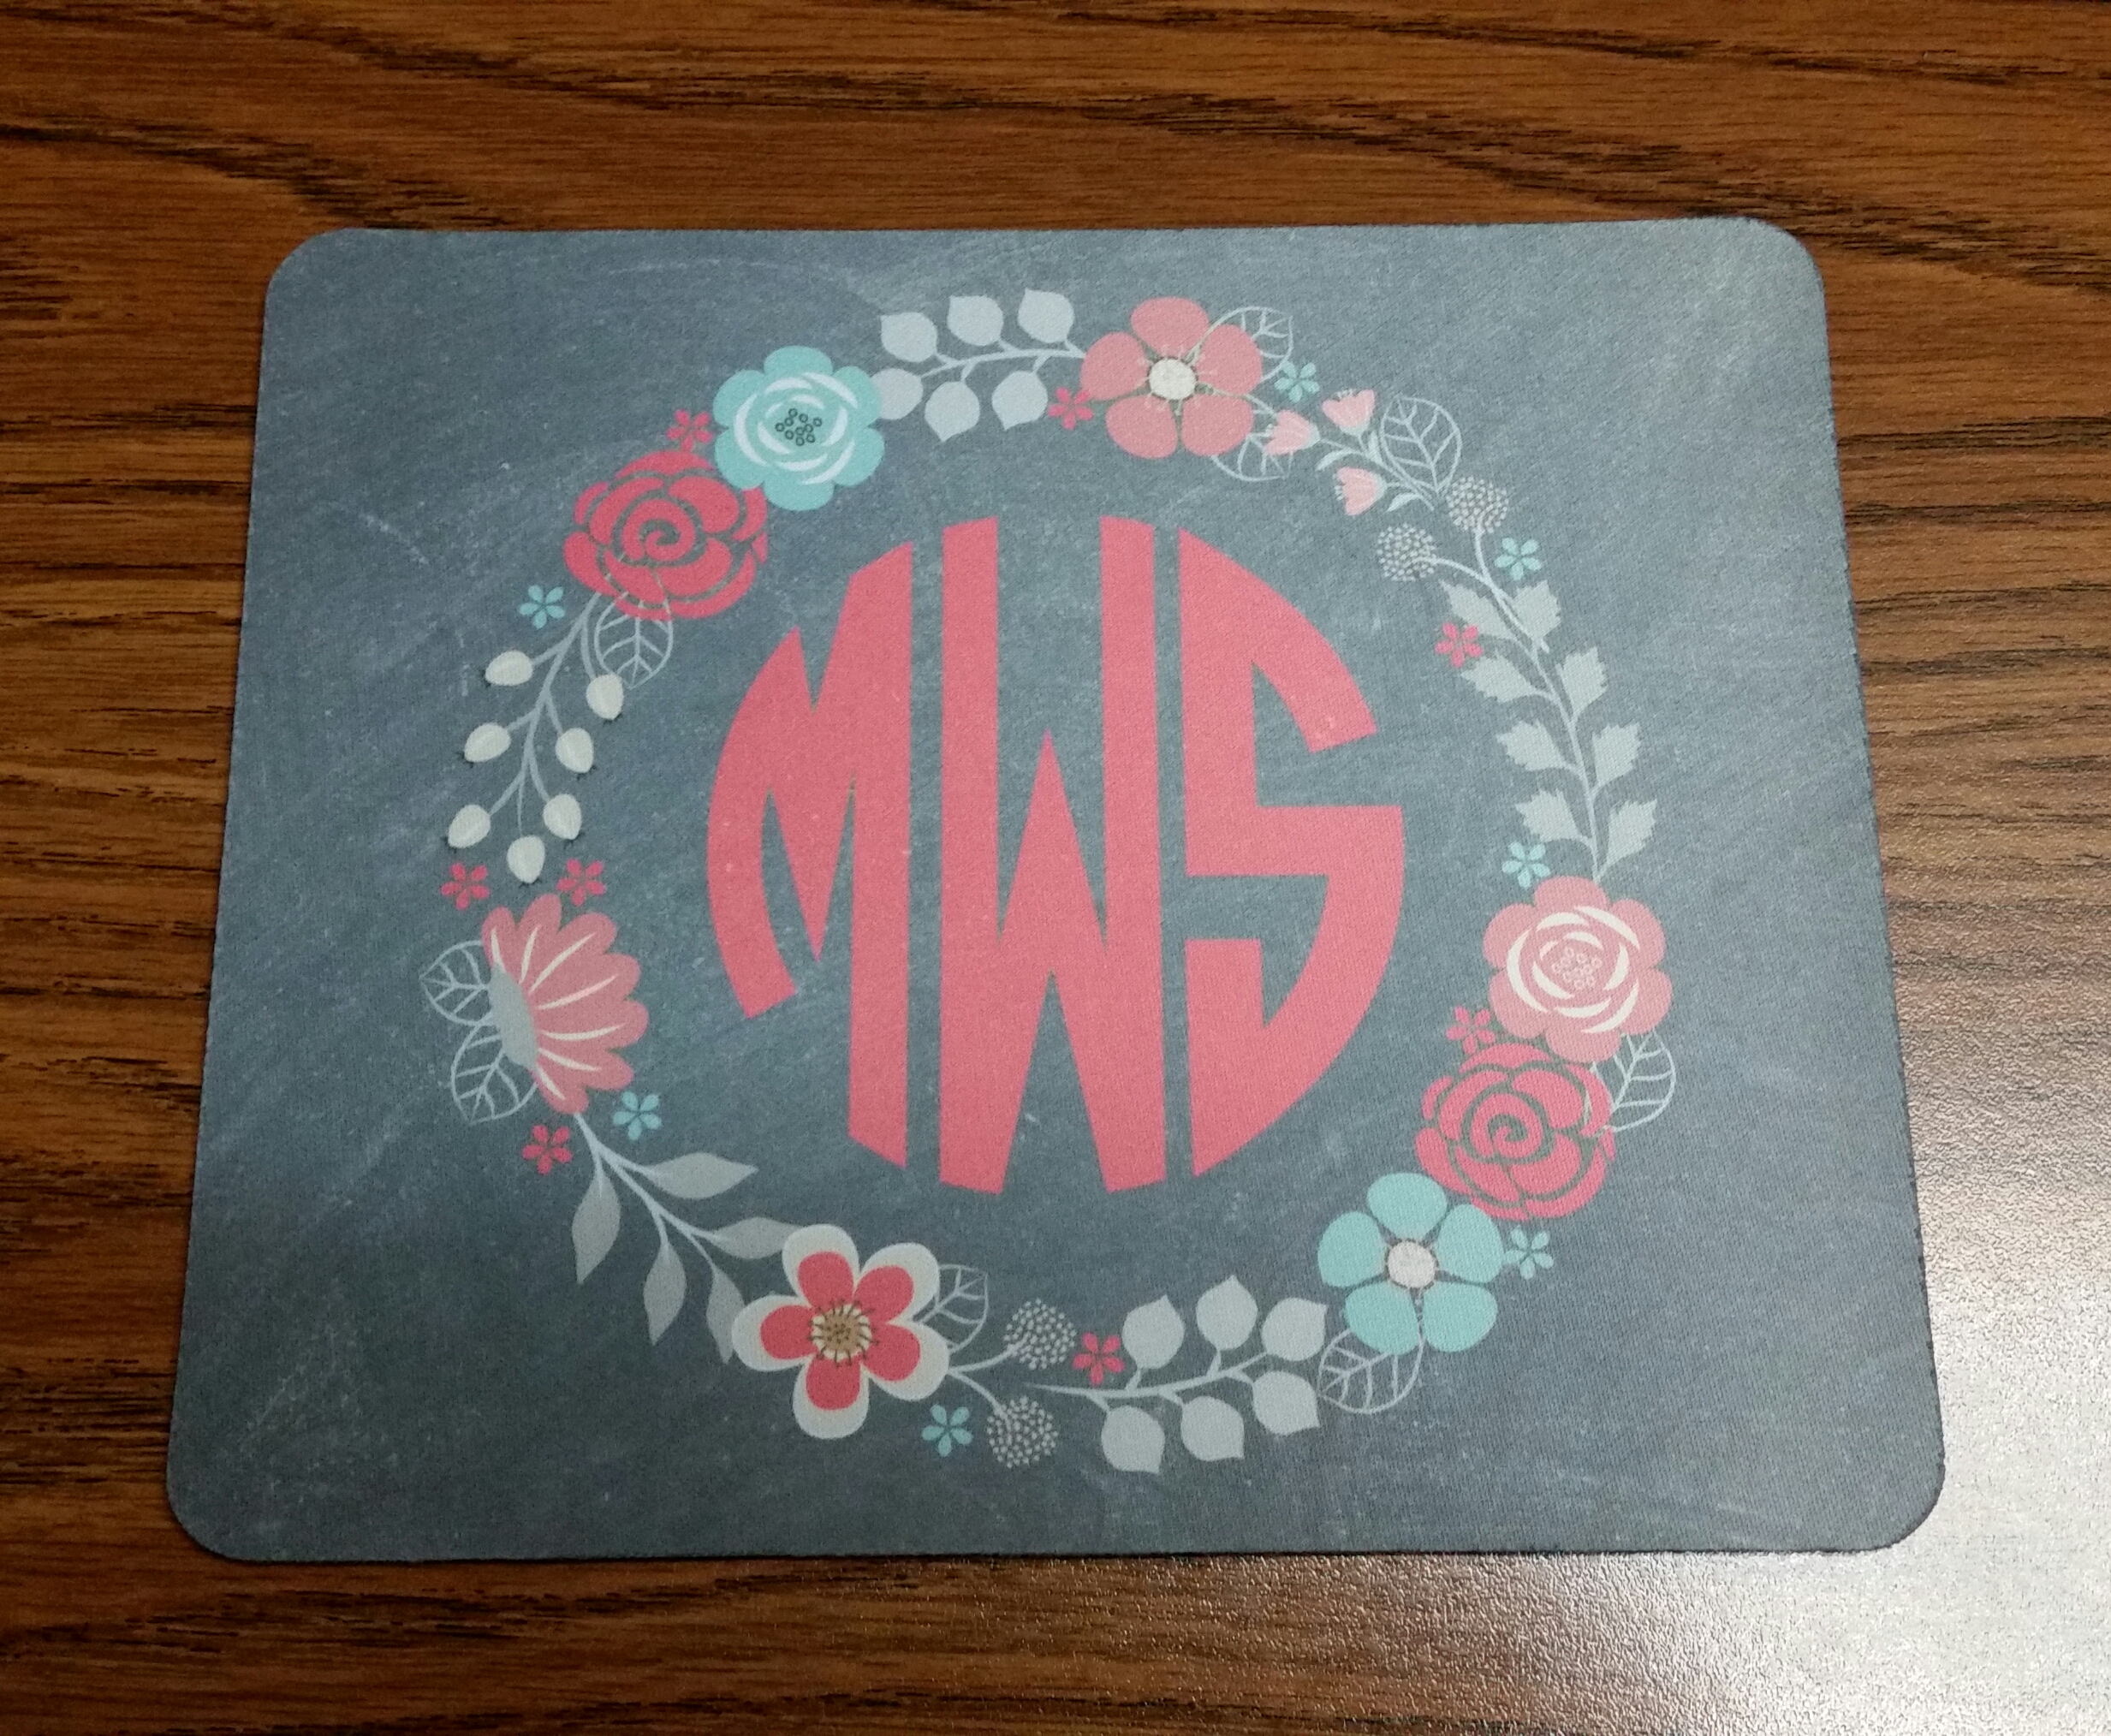 Custom Mouse Pad made with sublimation printing